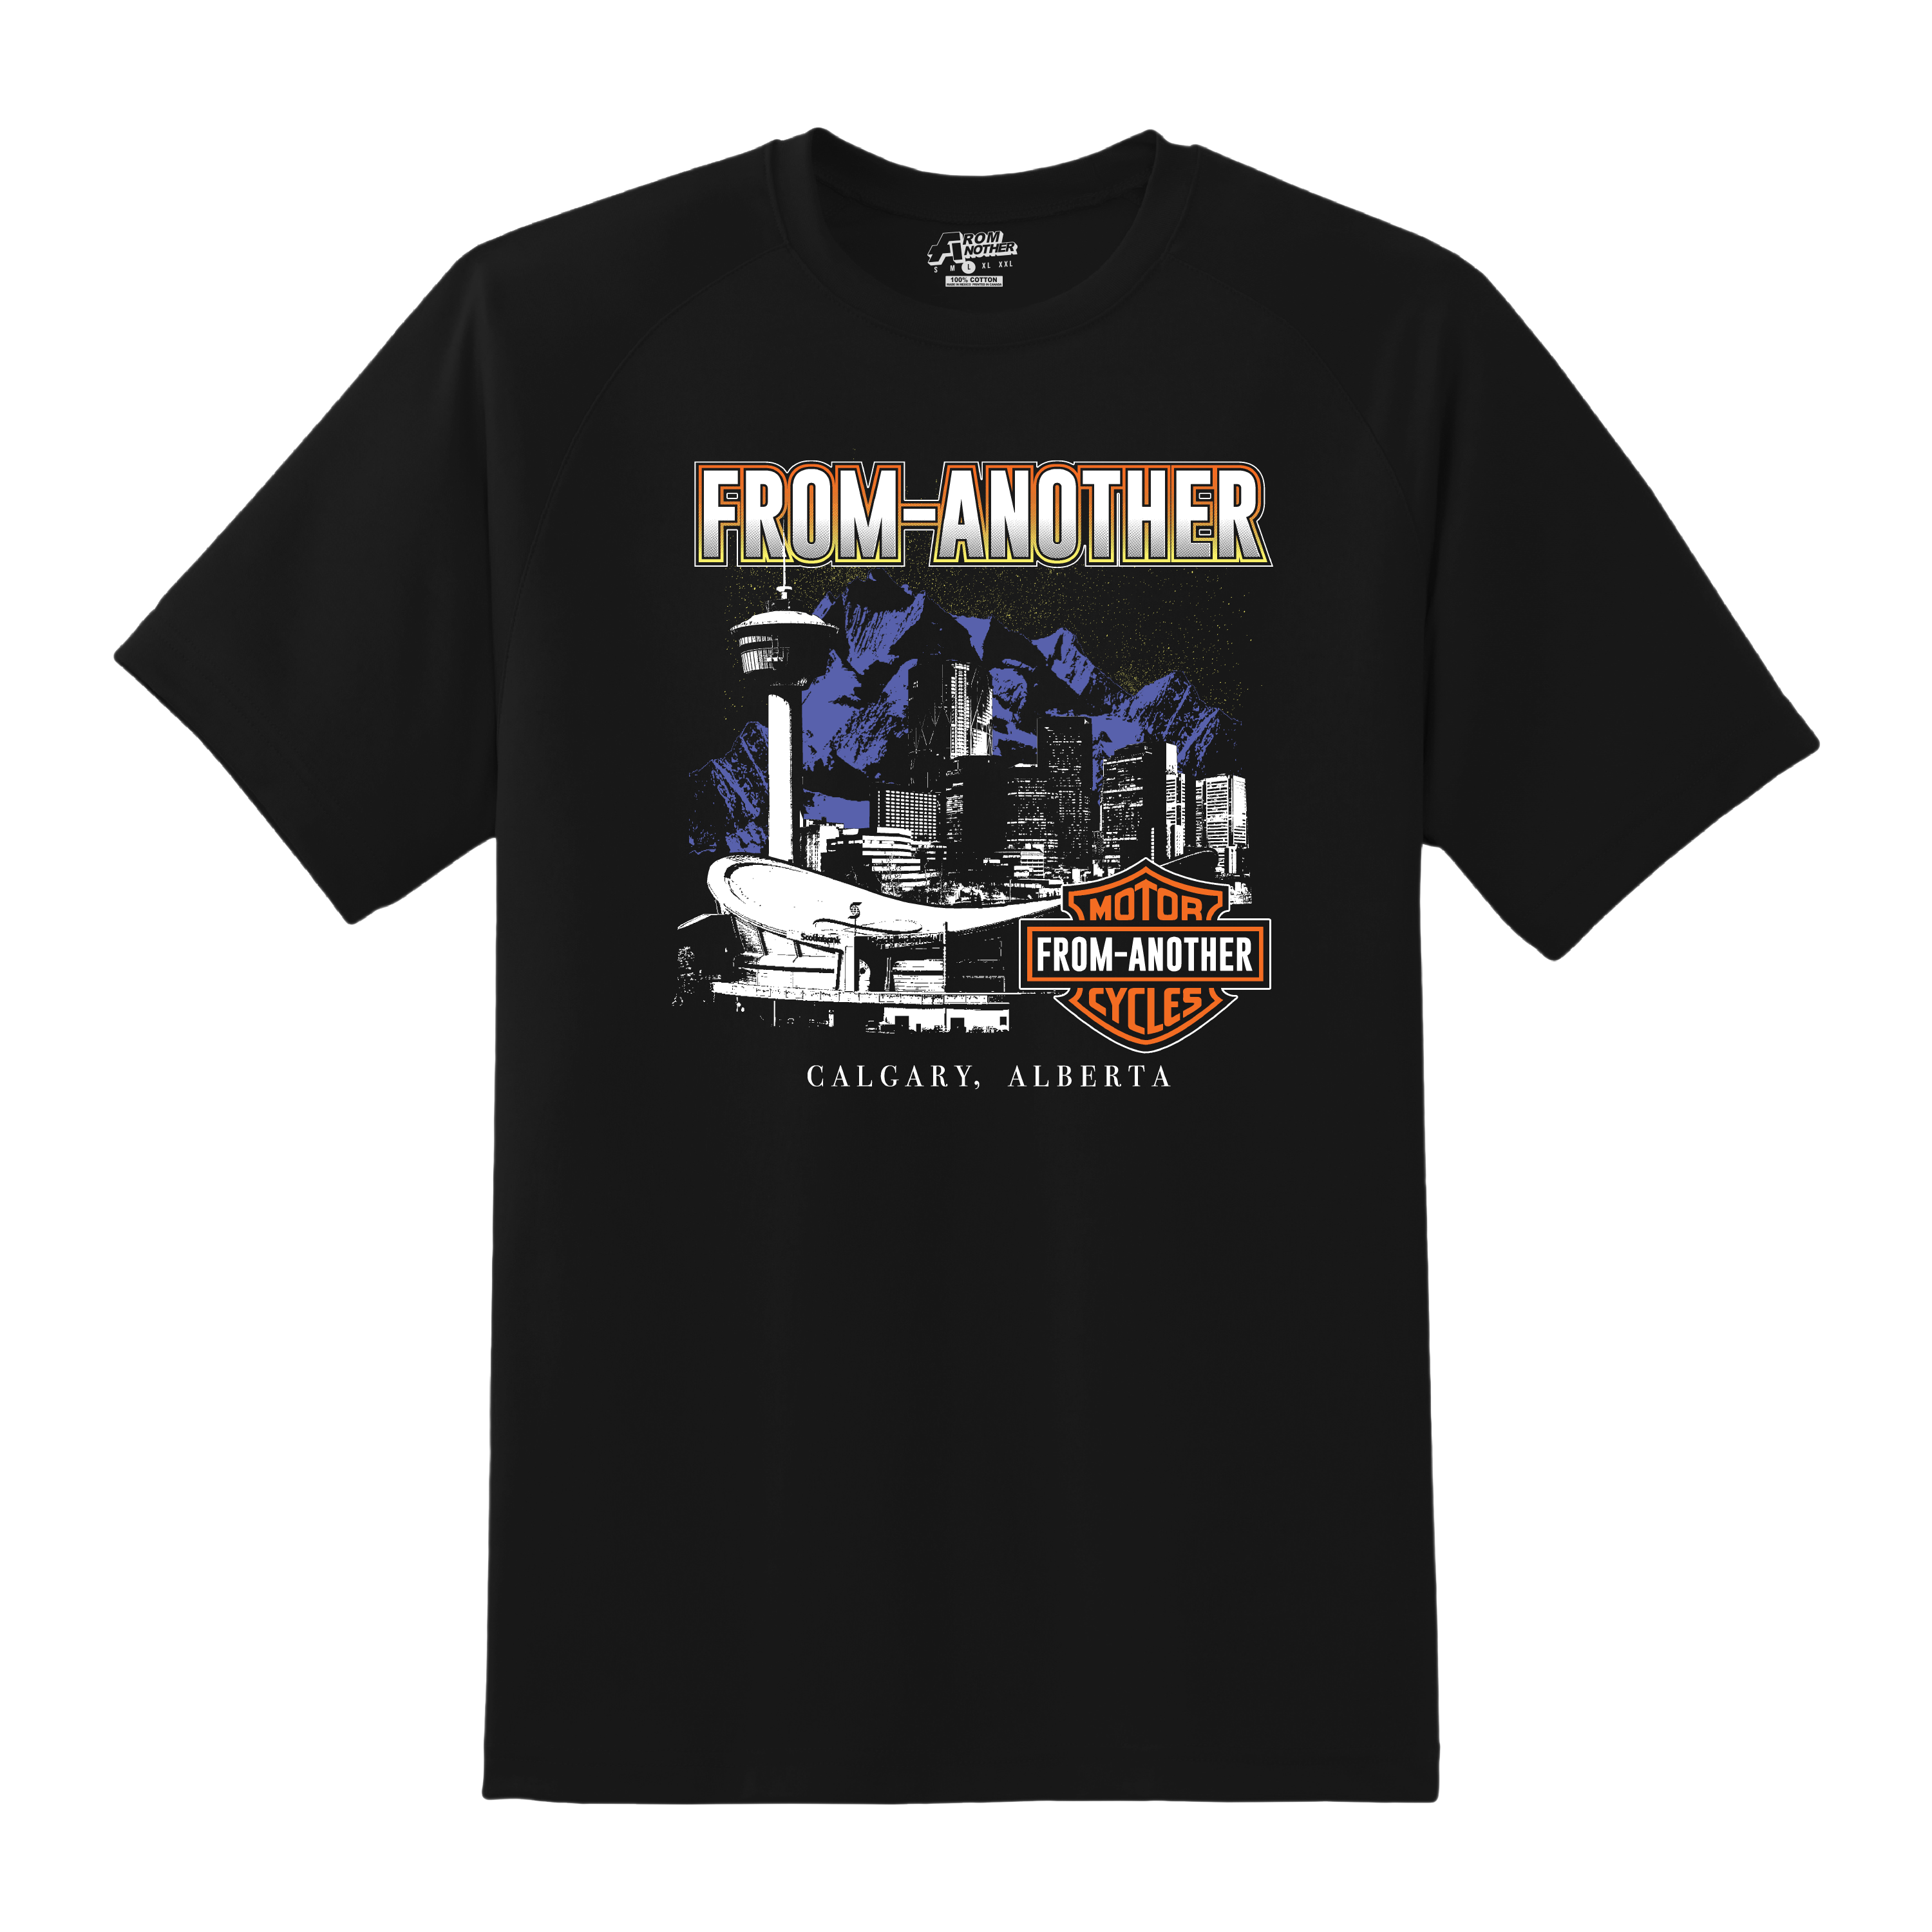 From Another Motor Cycles Tee